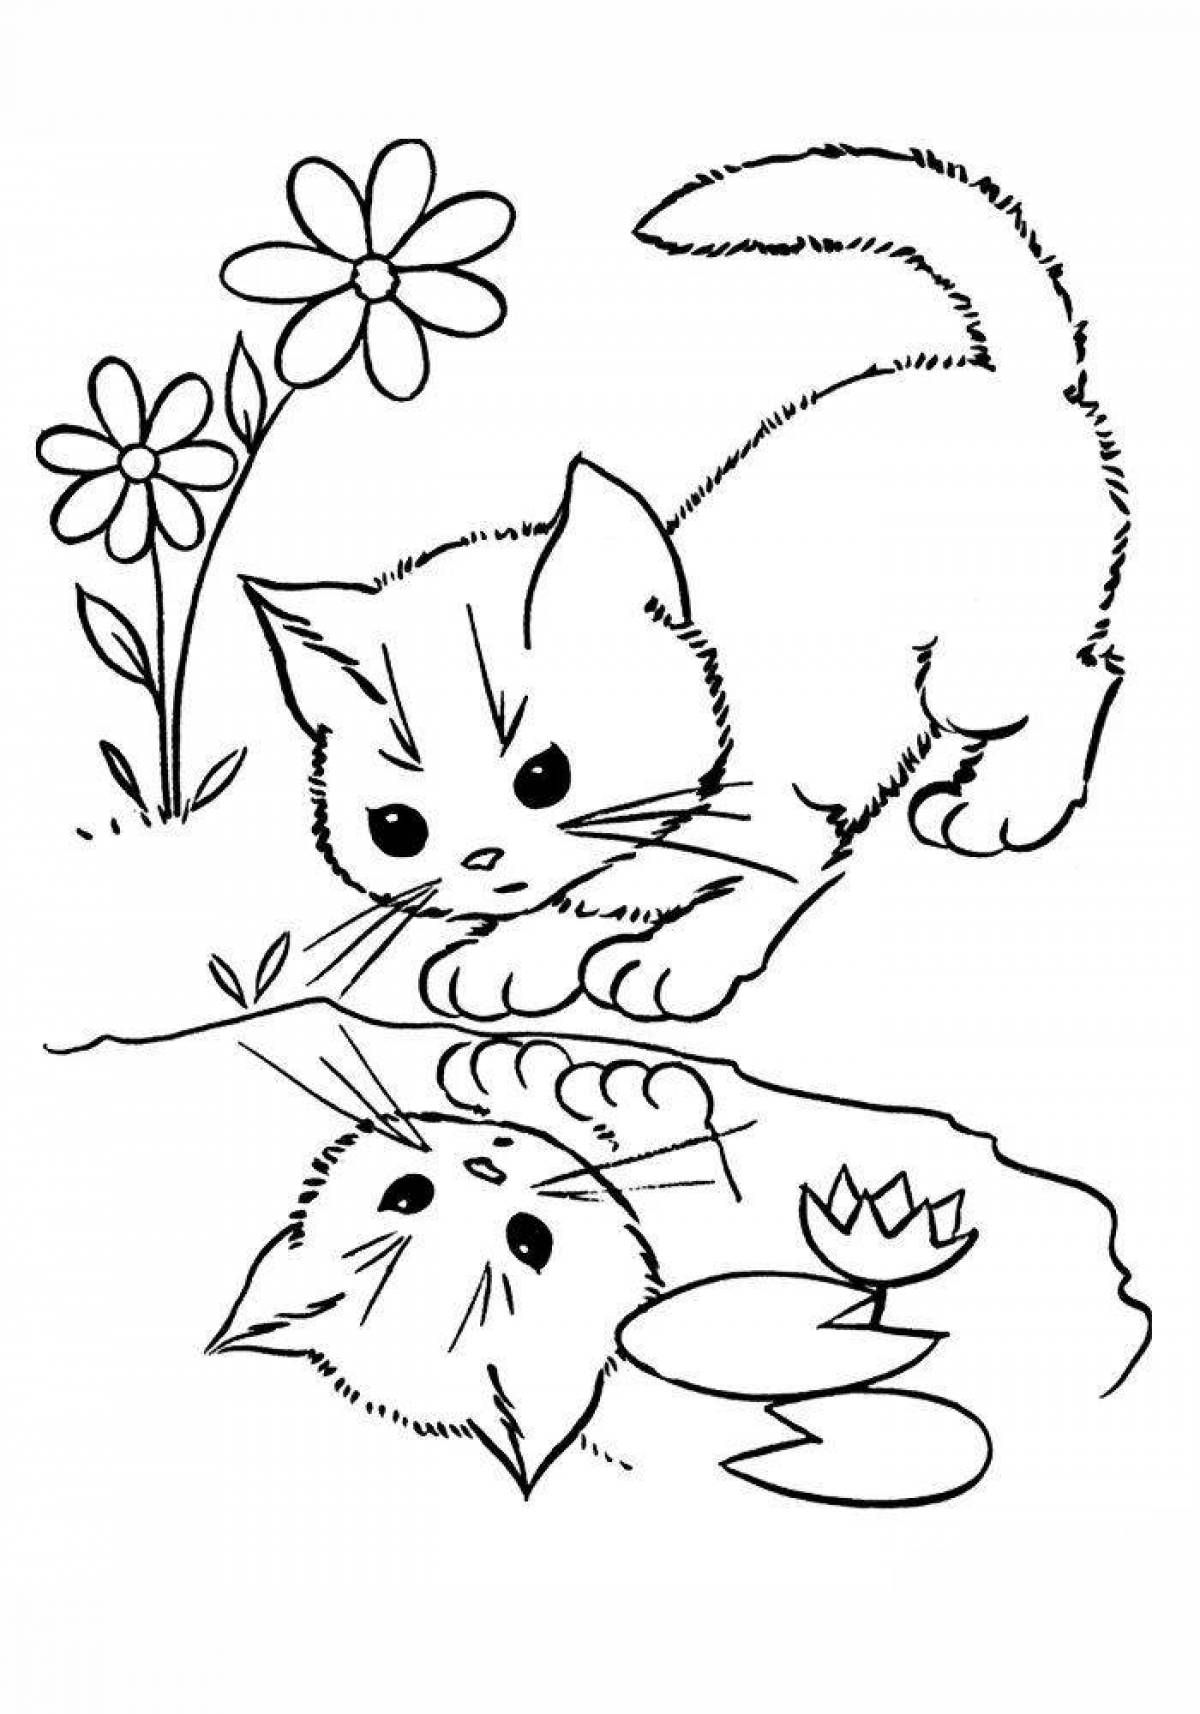 Colorful cat coloring page